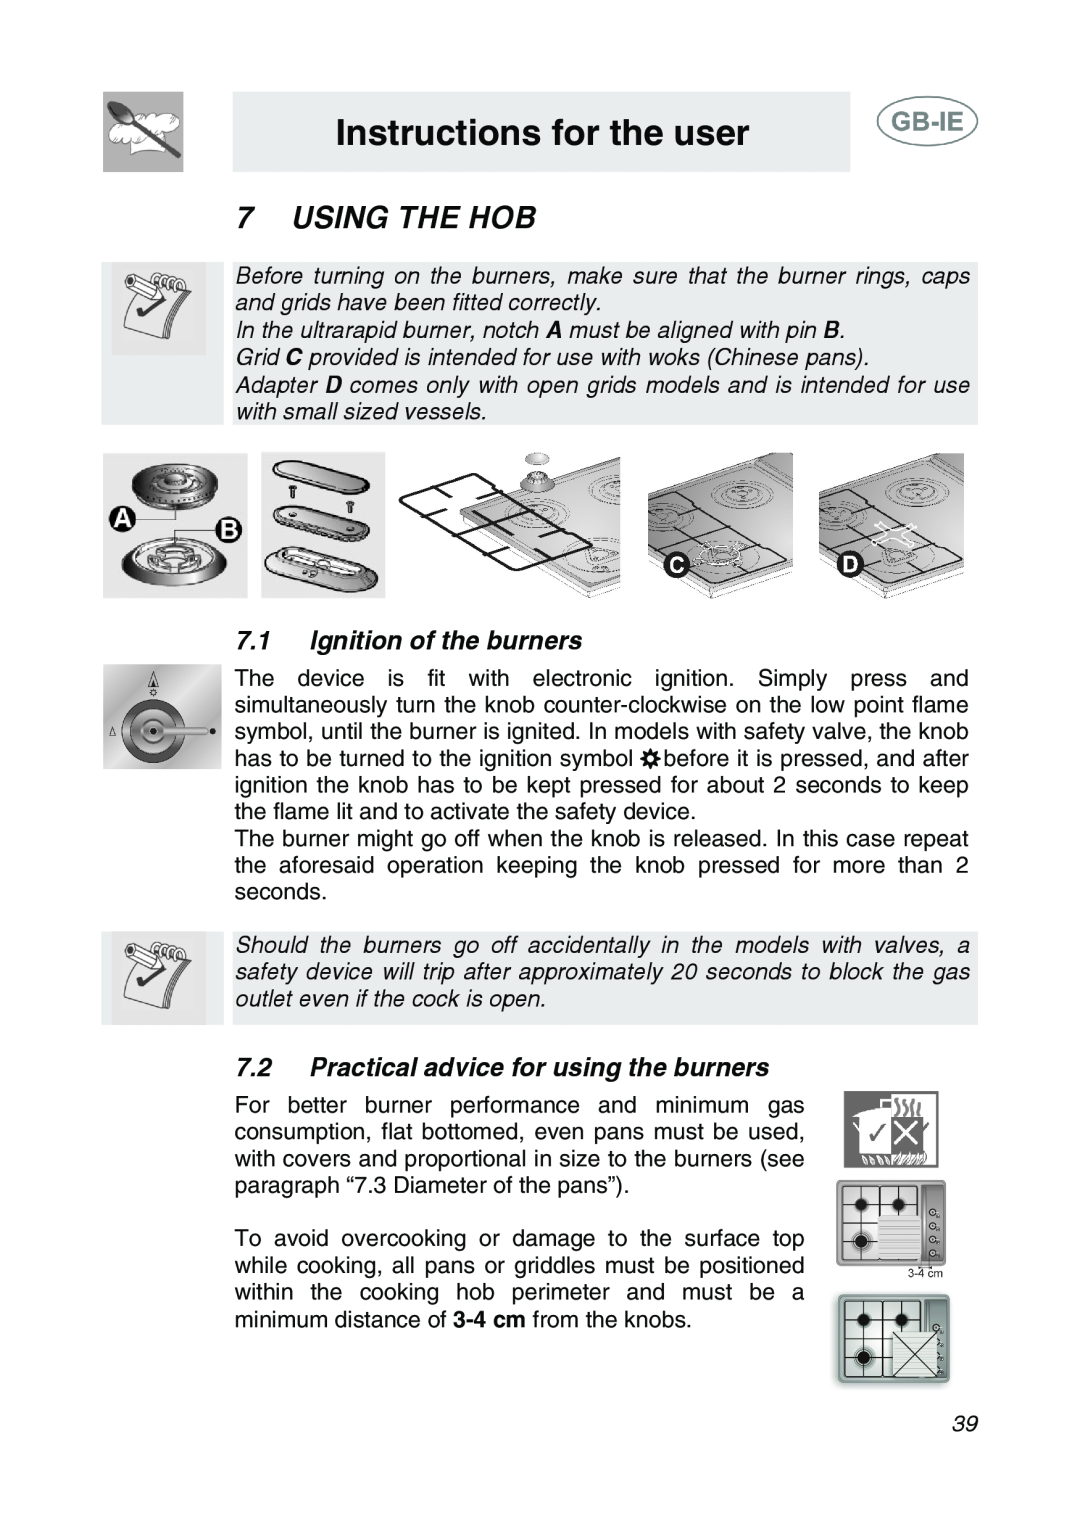 Smeg AP64S3 Instructions for the user, Using The Hob, Ignition of the burners, Practical advice for using the burners 